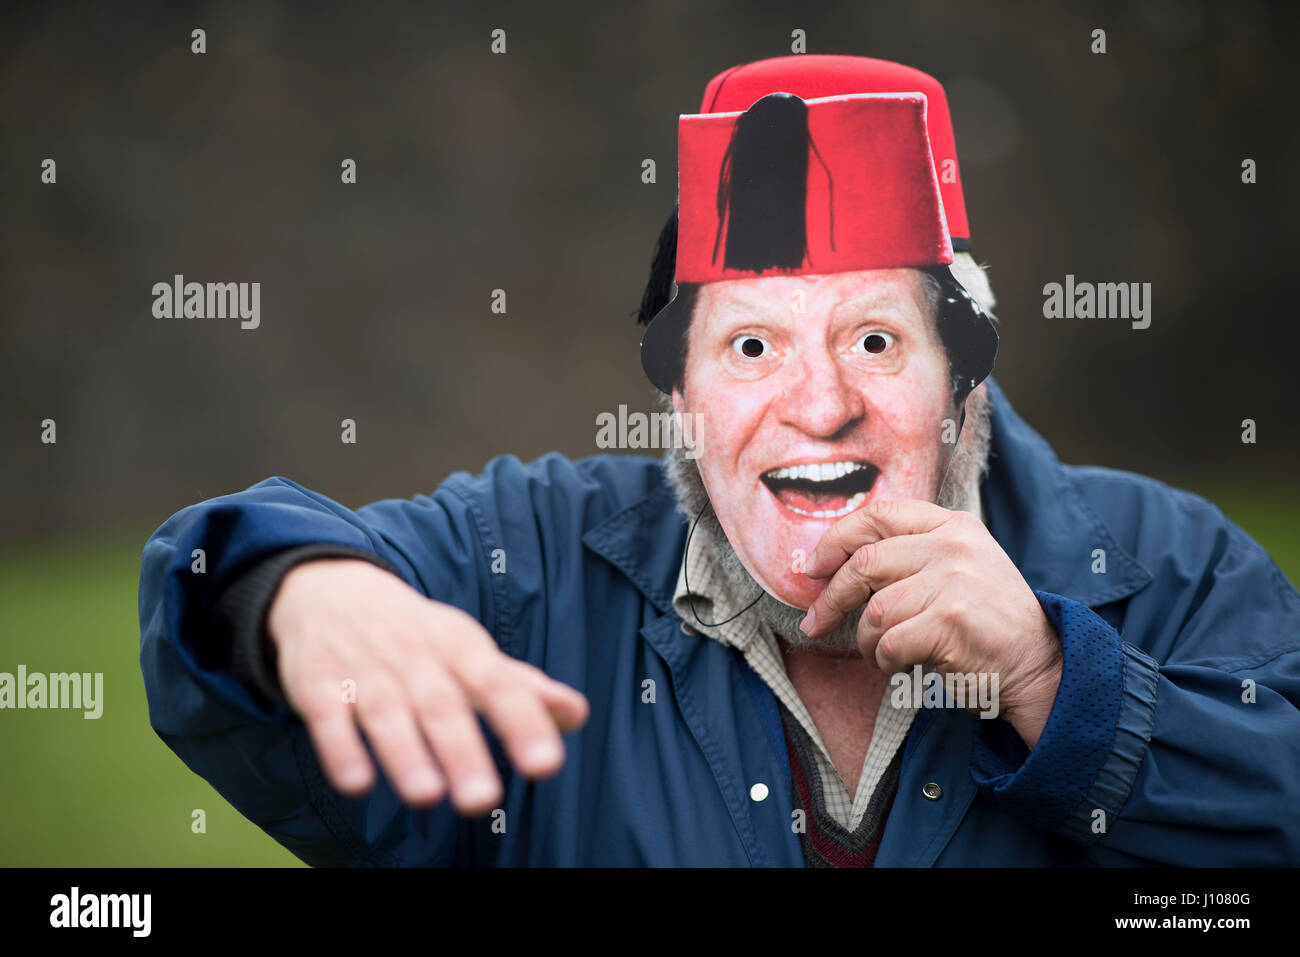 A world record has been set for the most Tommy Cooper impressionists at one venue held at Caerphilly Castle in Caerphilly, South Wales.  Picture shows Stock Photo